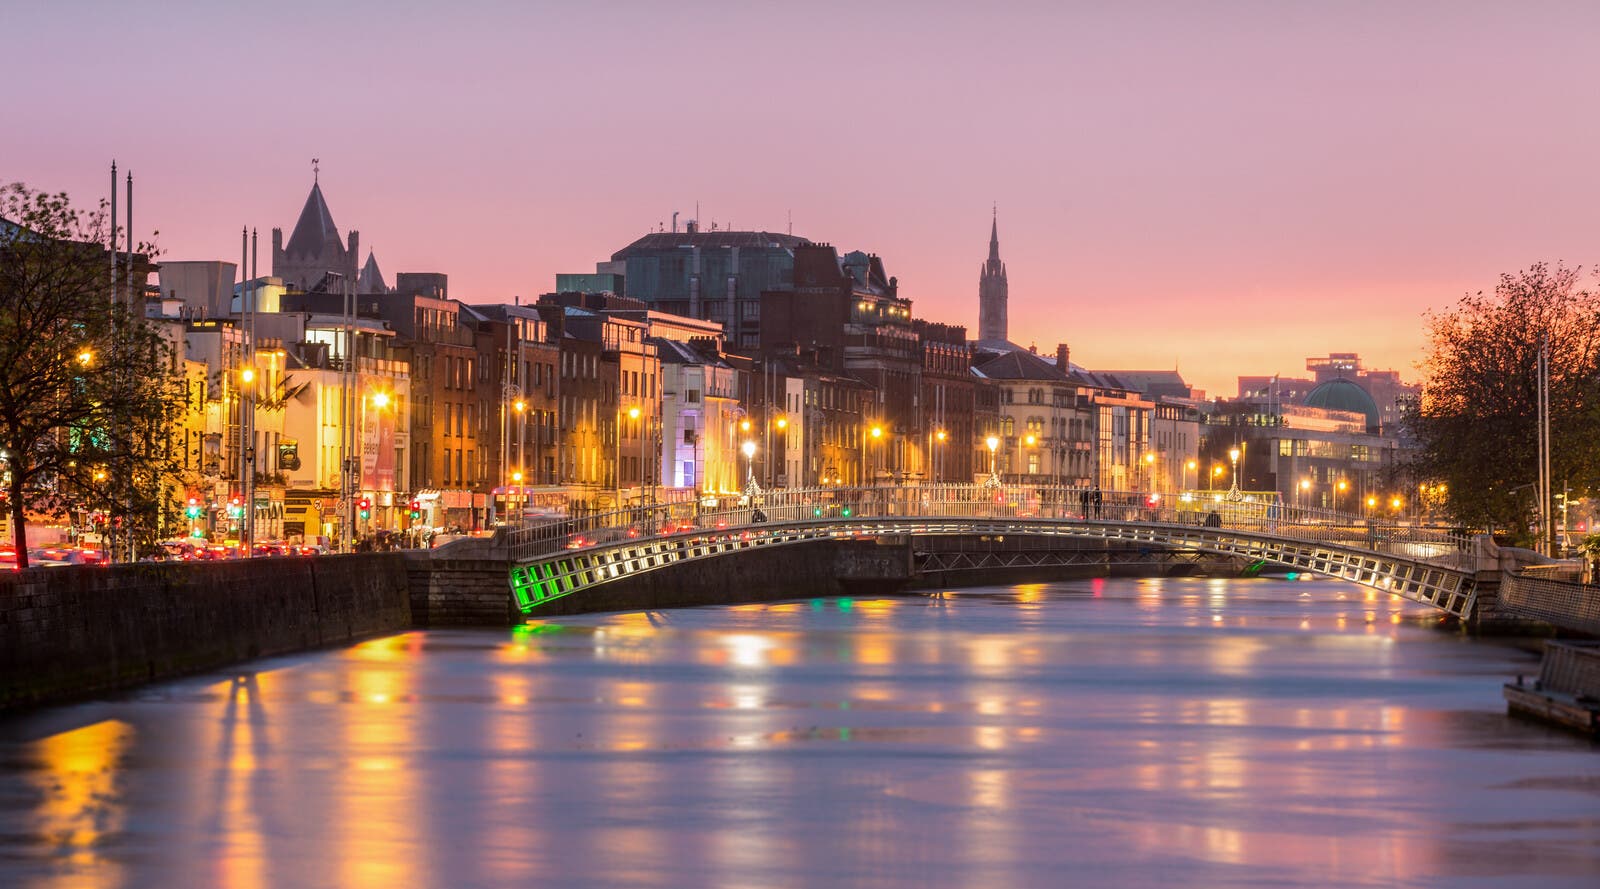 An image of Dublin in the evening